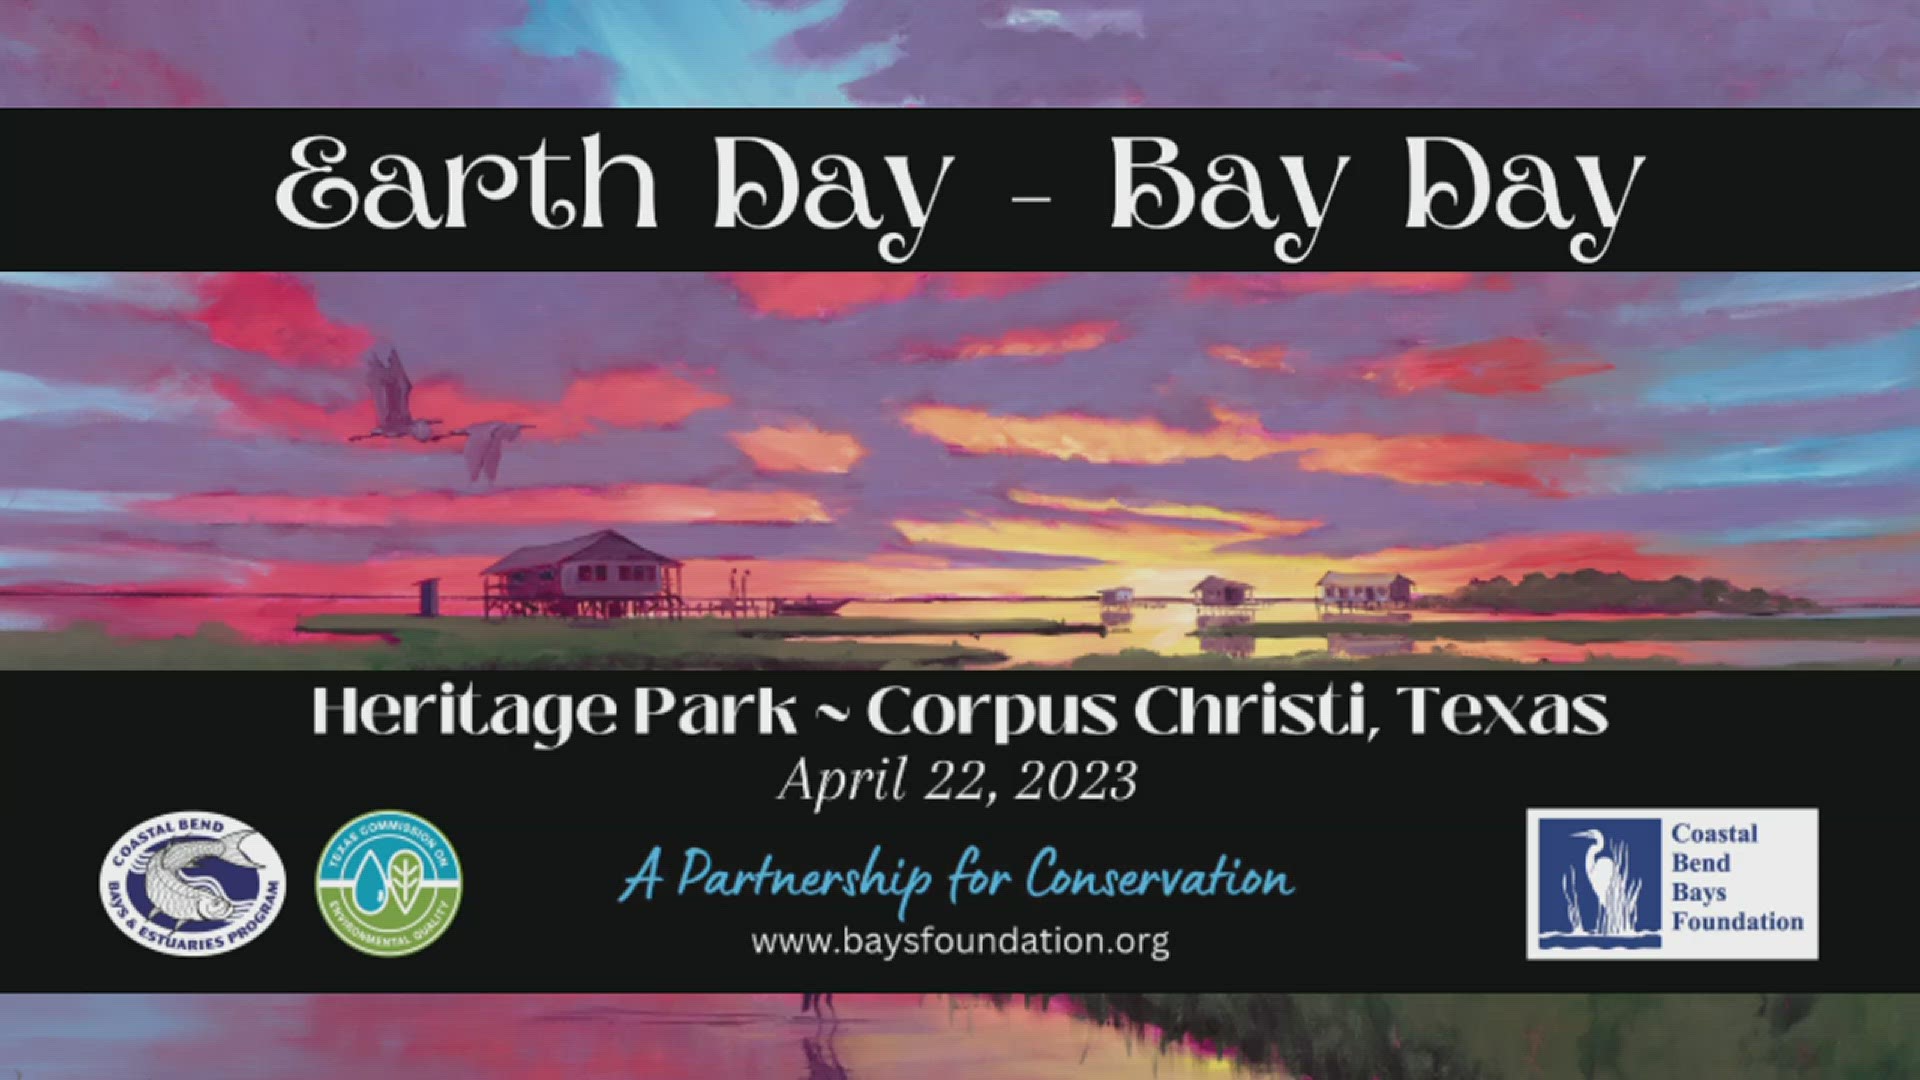 Here's to another year on Earth! 24th Annual Earth Day Bay Day to